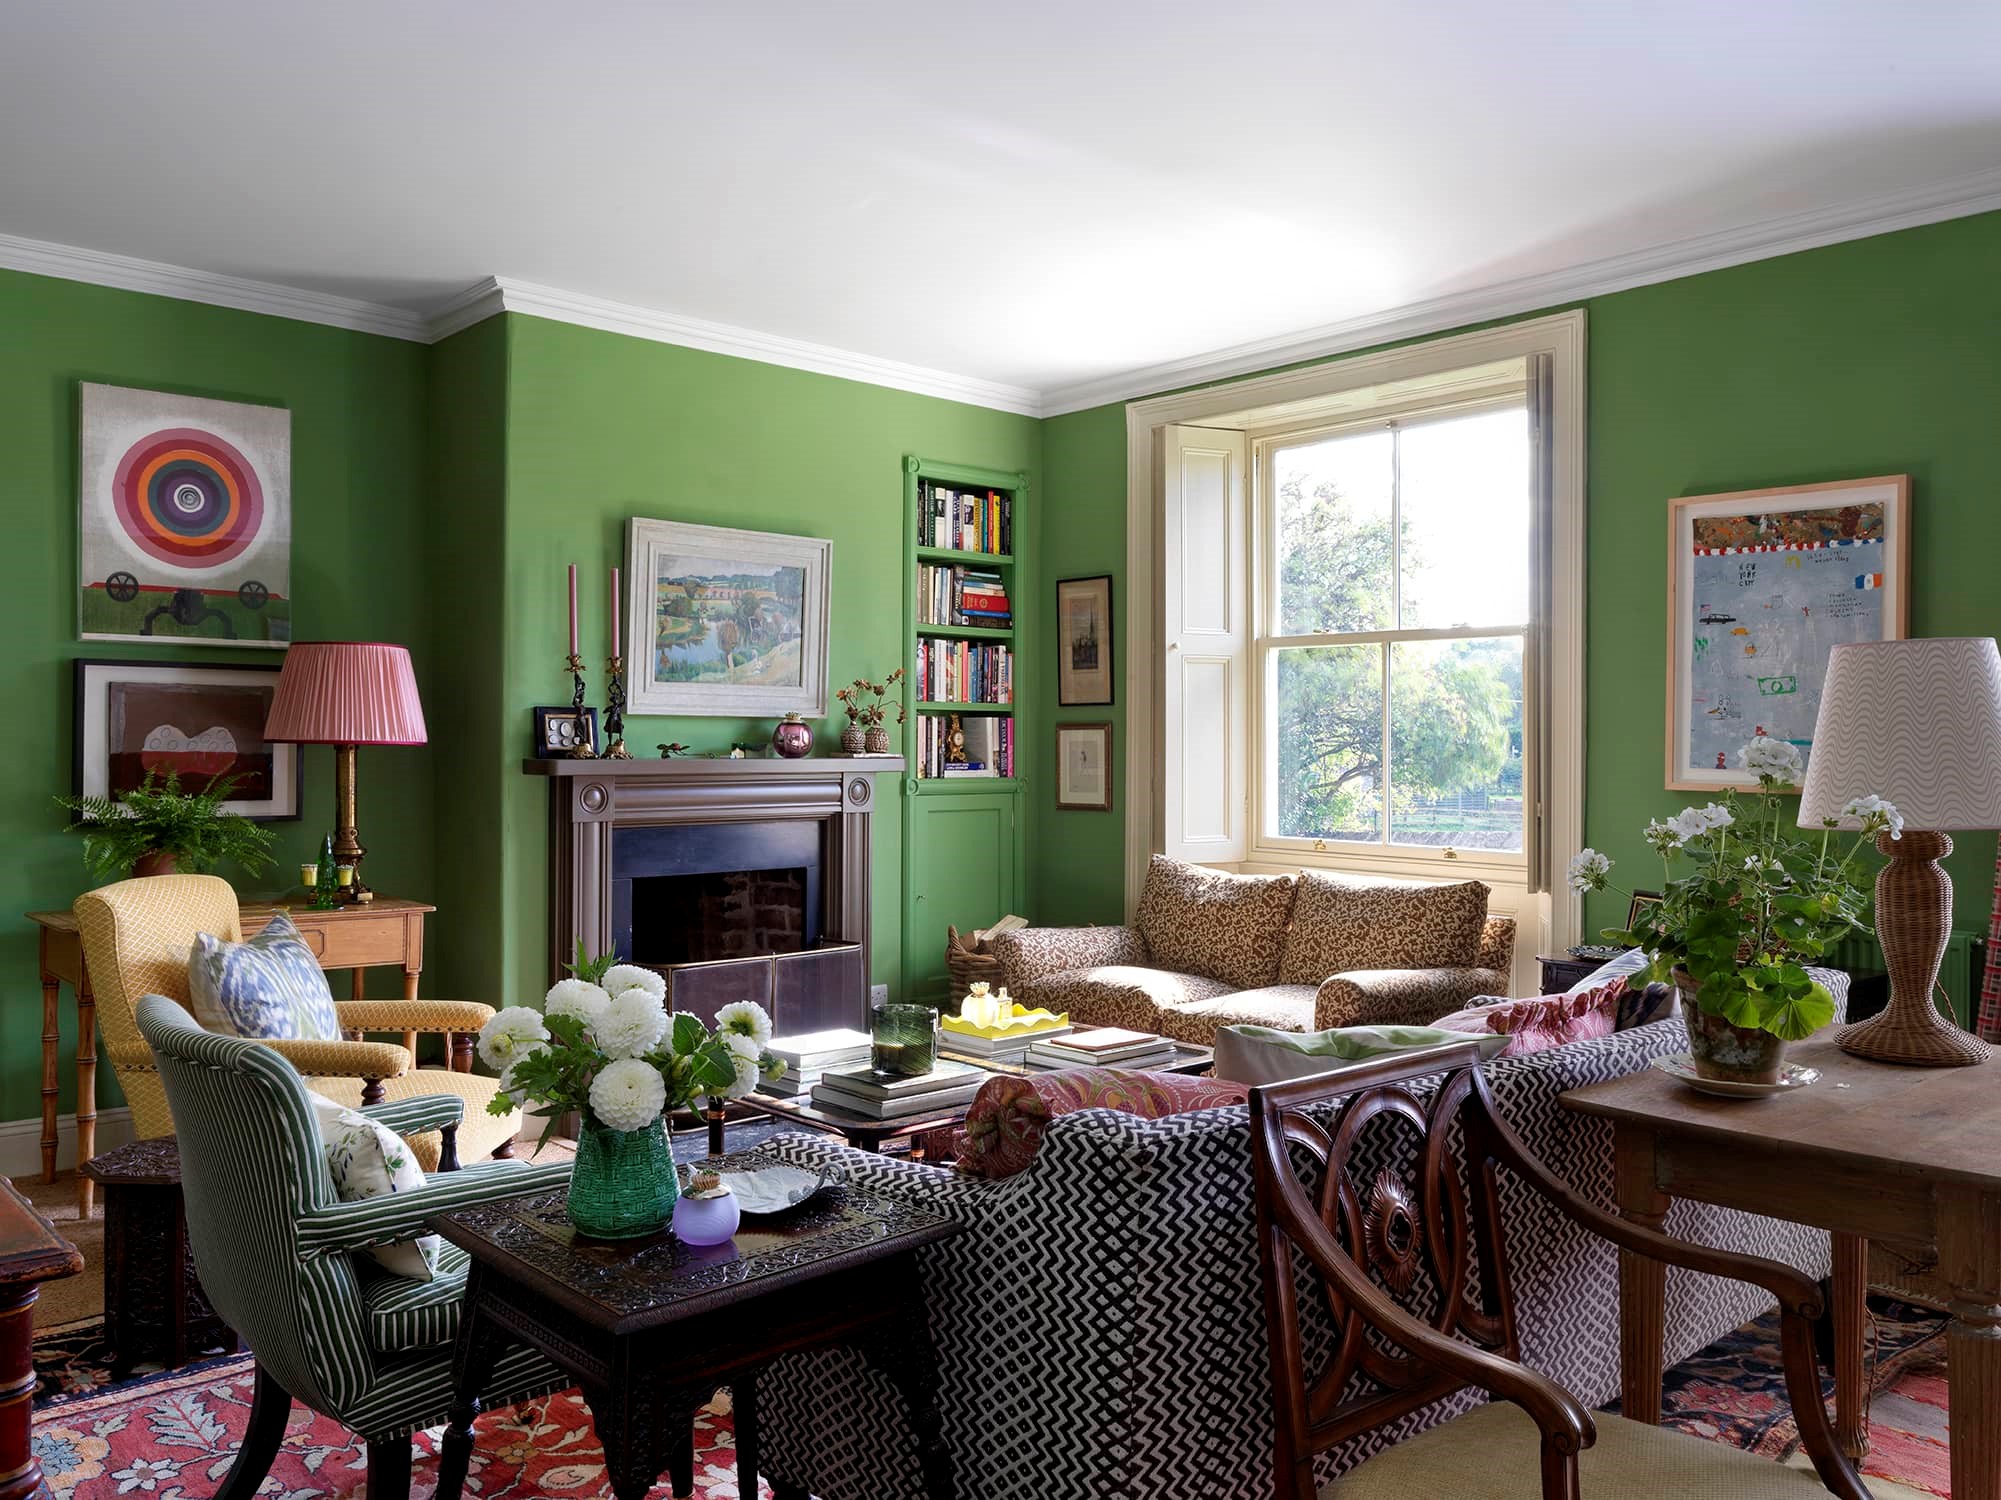 North Farm, Walworth - convivial seating area in the green sitting room